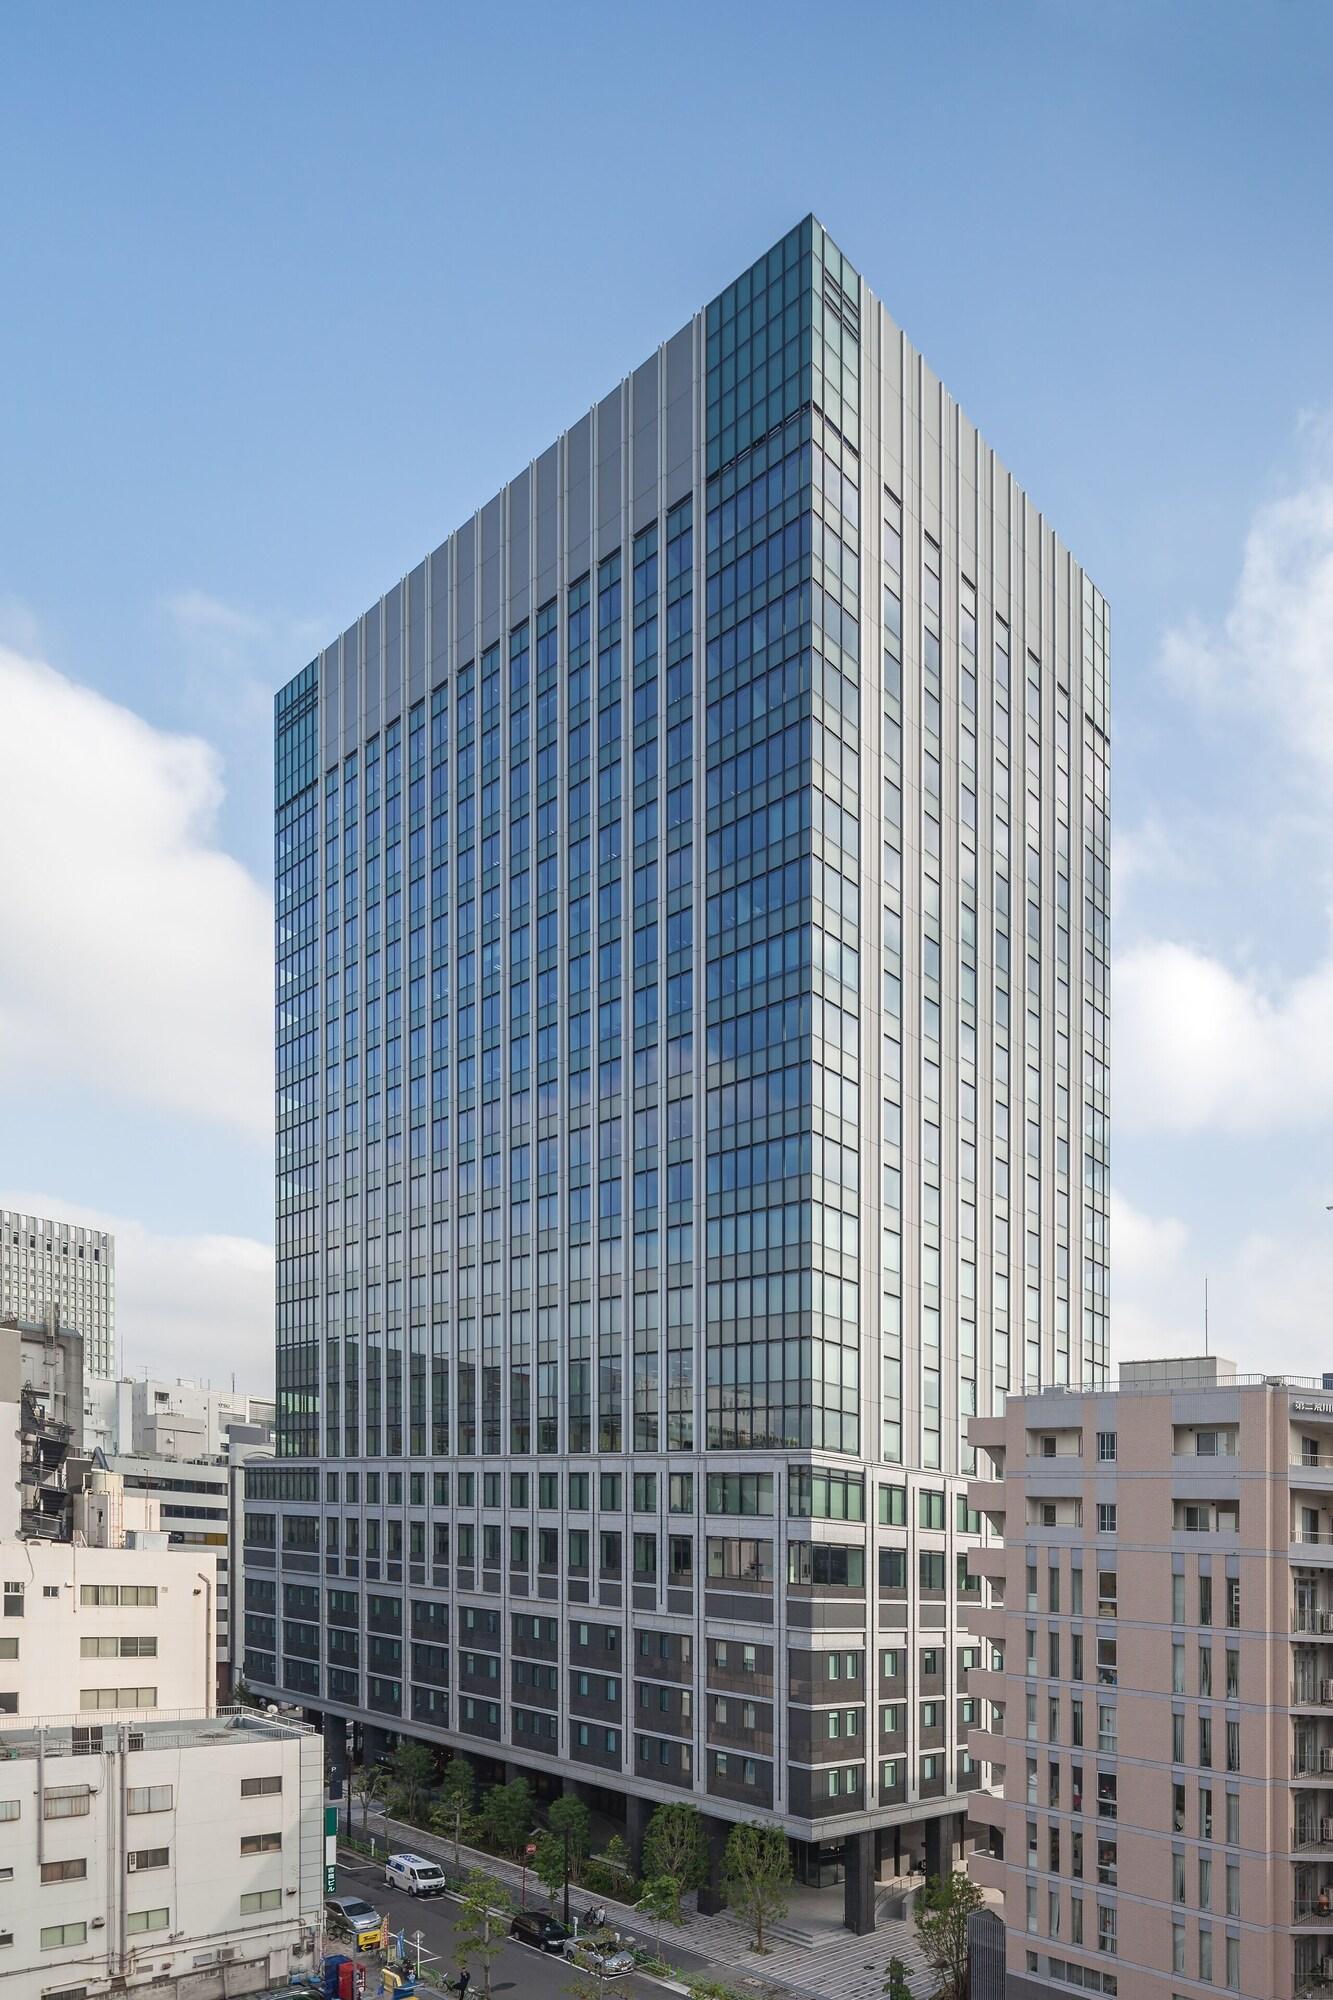 Courtyard By Marriott Tokyo Station Hotel Exterior photo